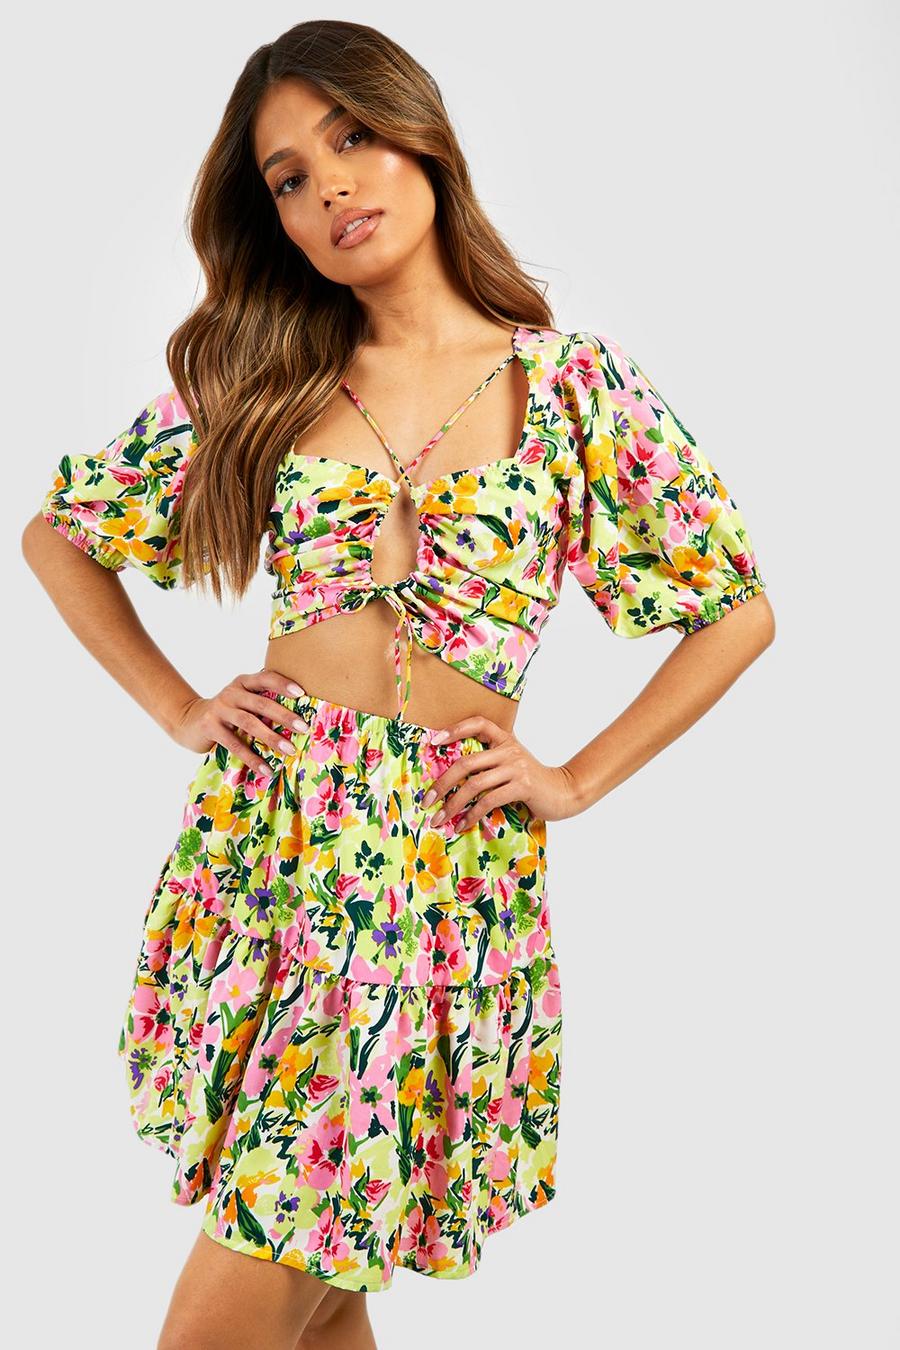 Chartreuse Floral Strappy Sweetheart Bralettete & Mini Skirt